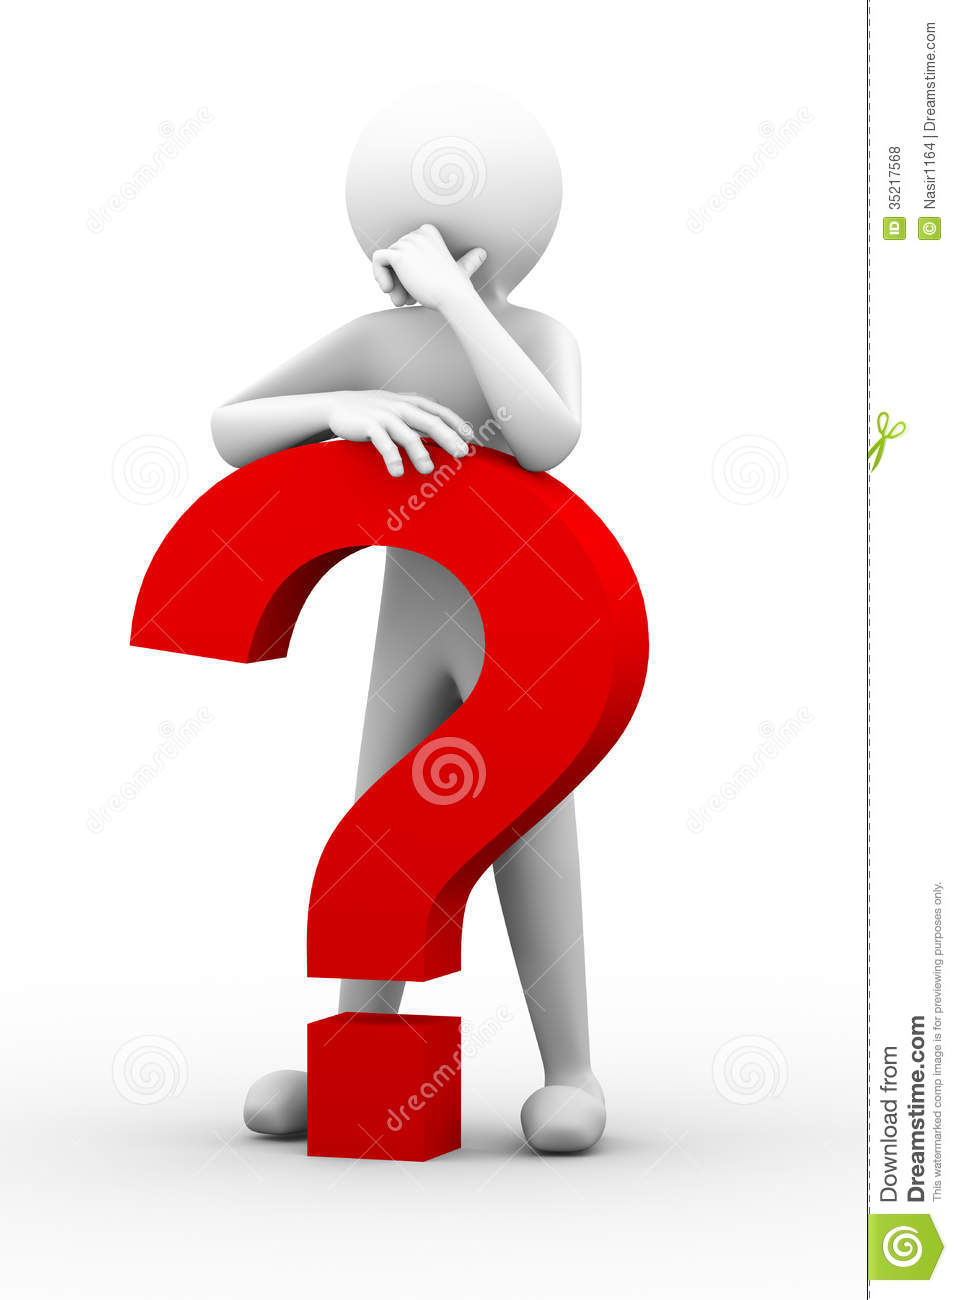 3d Confused Person With Question Mark Illustration Royalty Free Stock